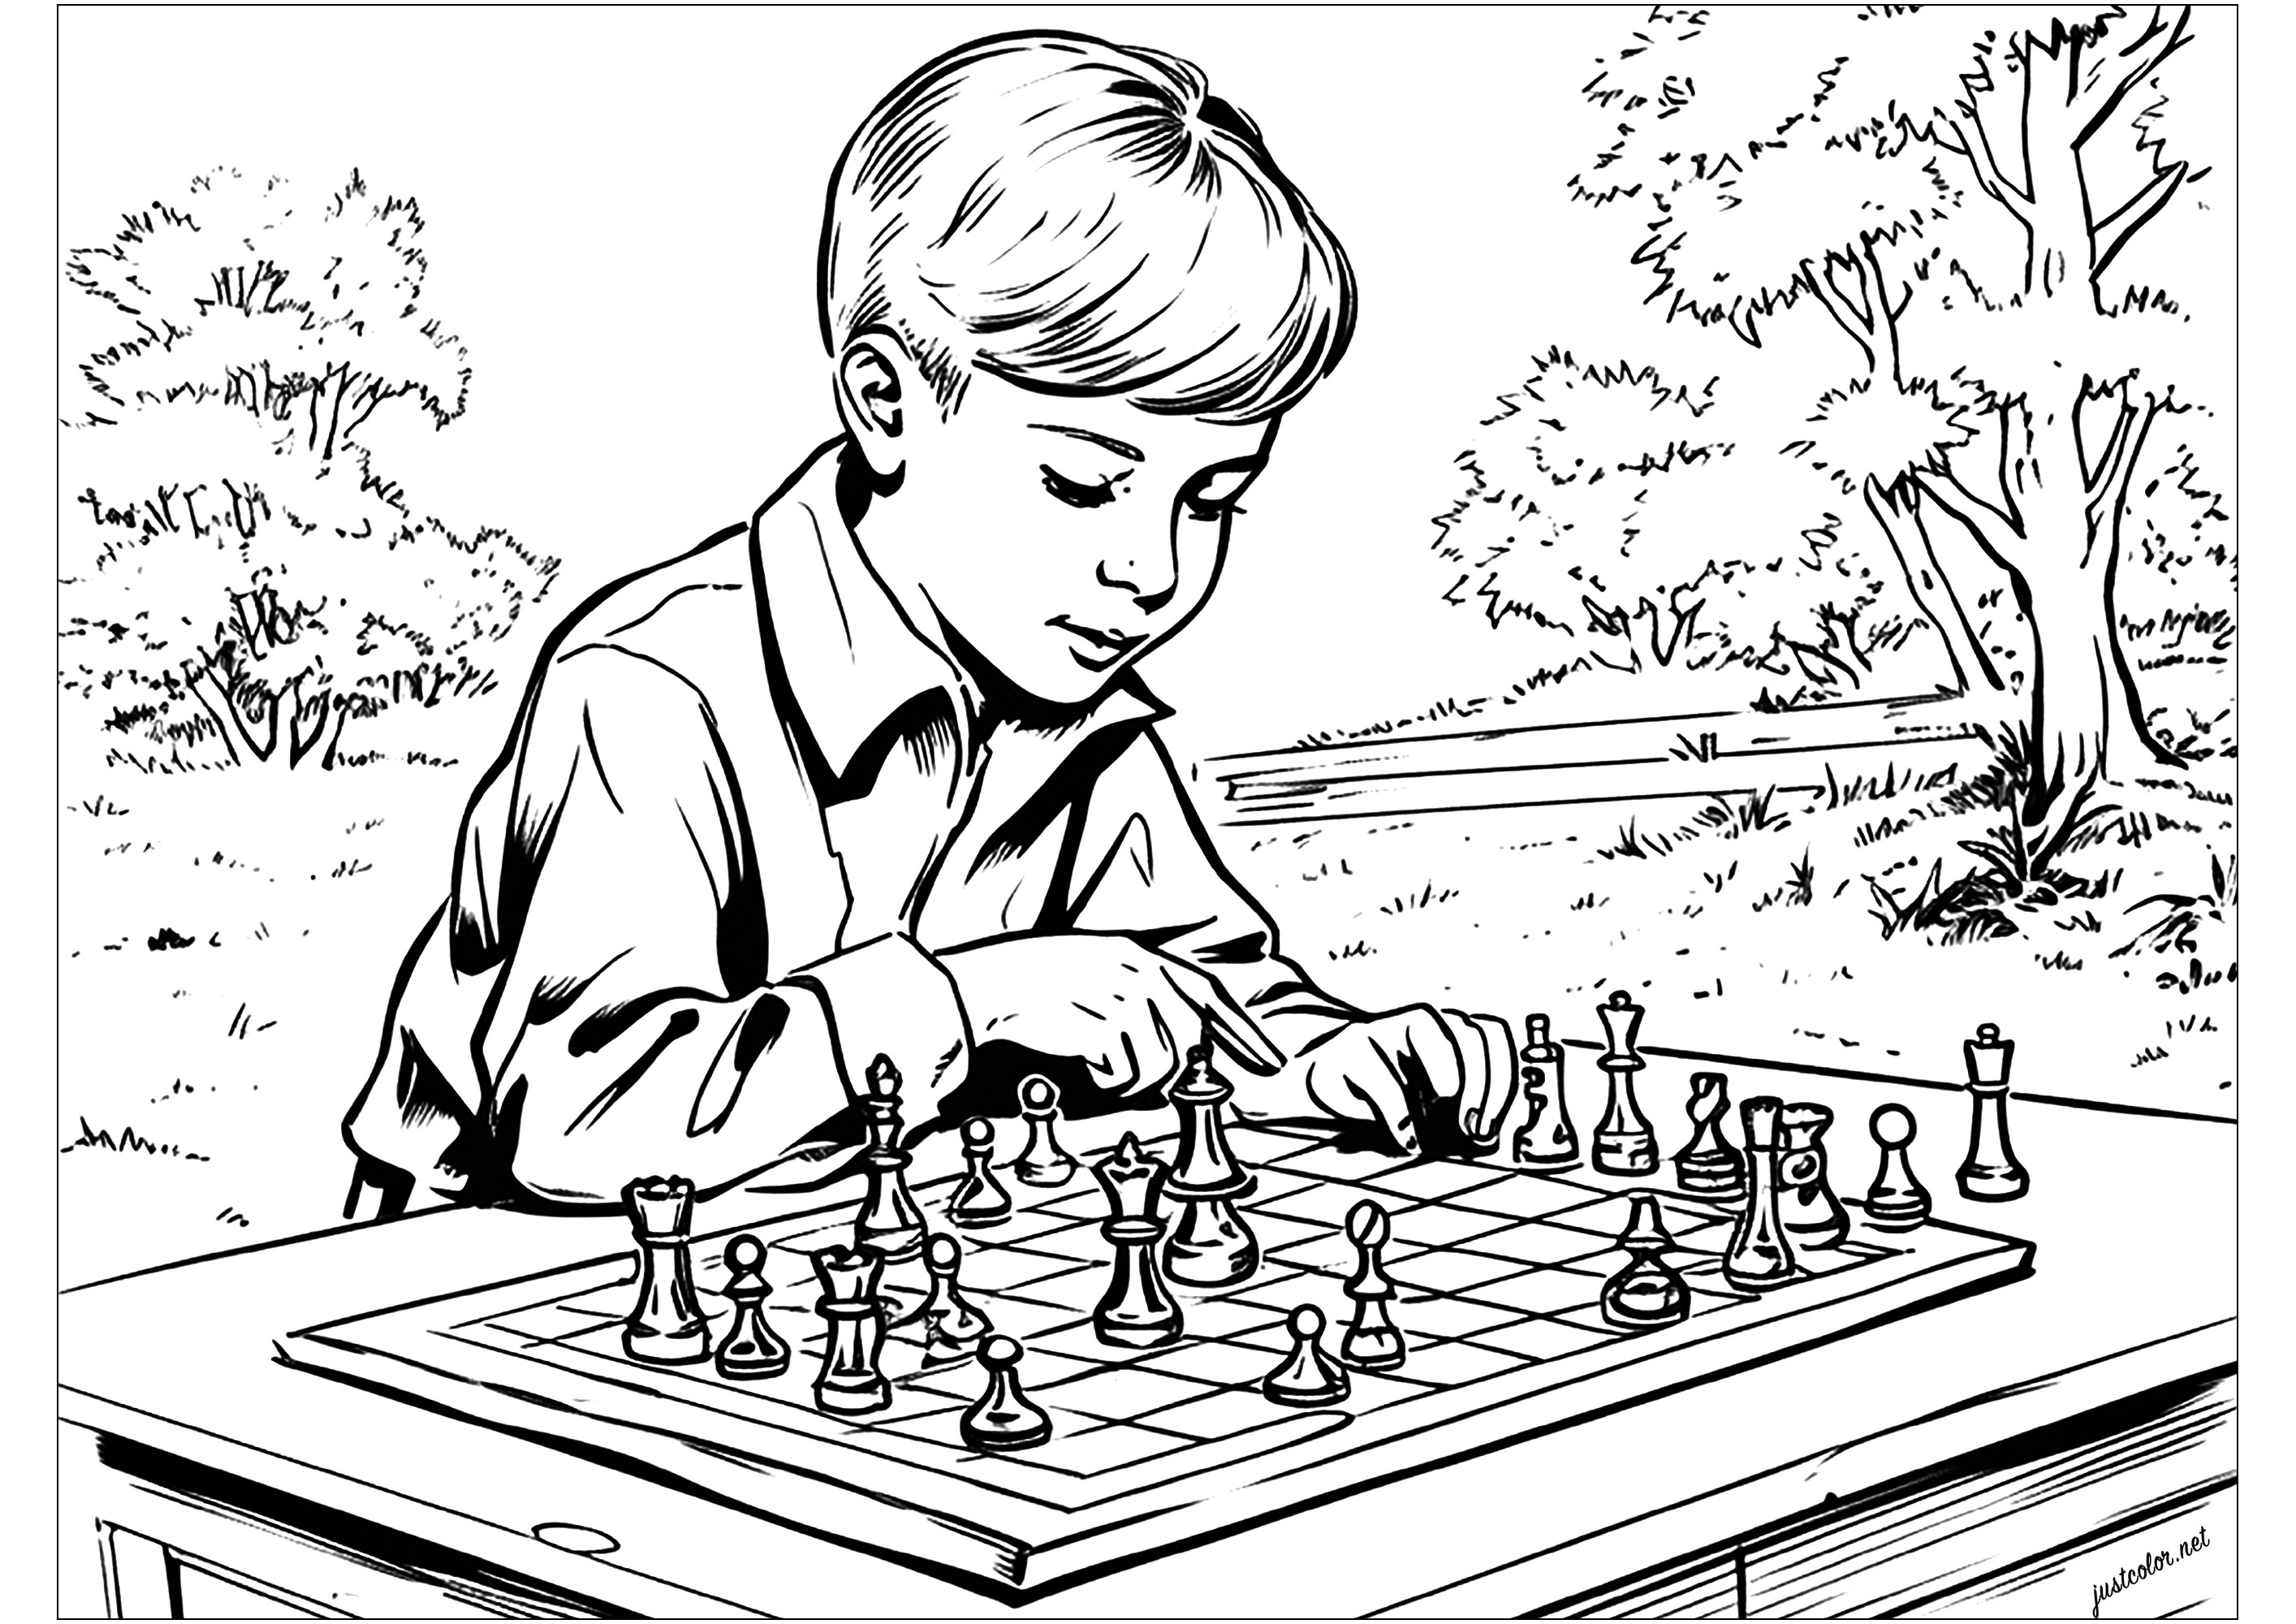 Coloring a child playing chess. A style inspired by mid-20th-century book illustrations